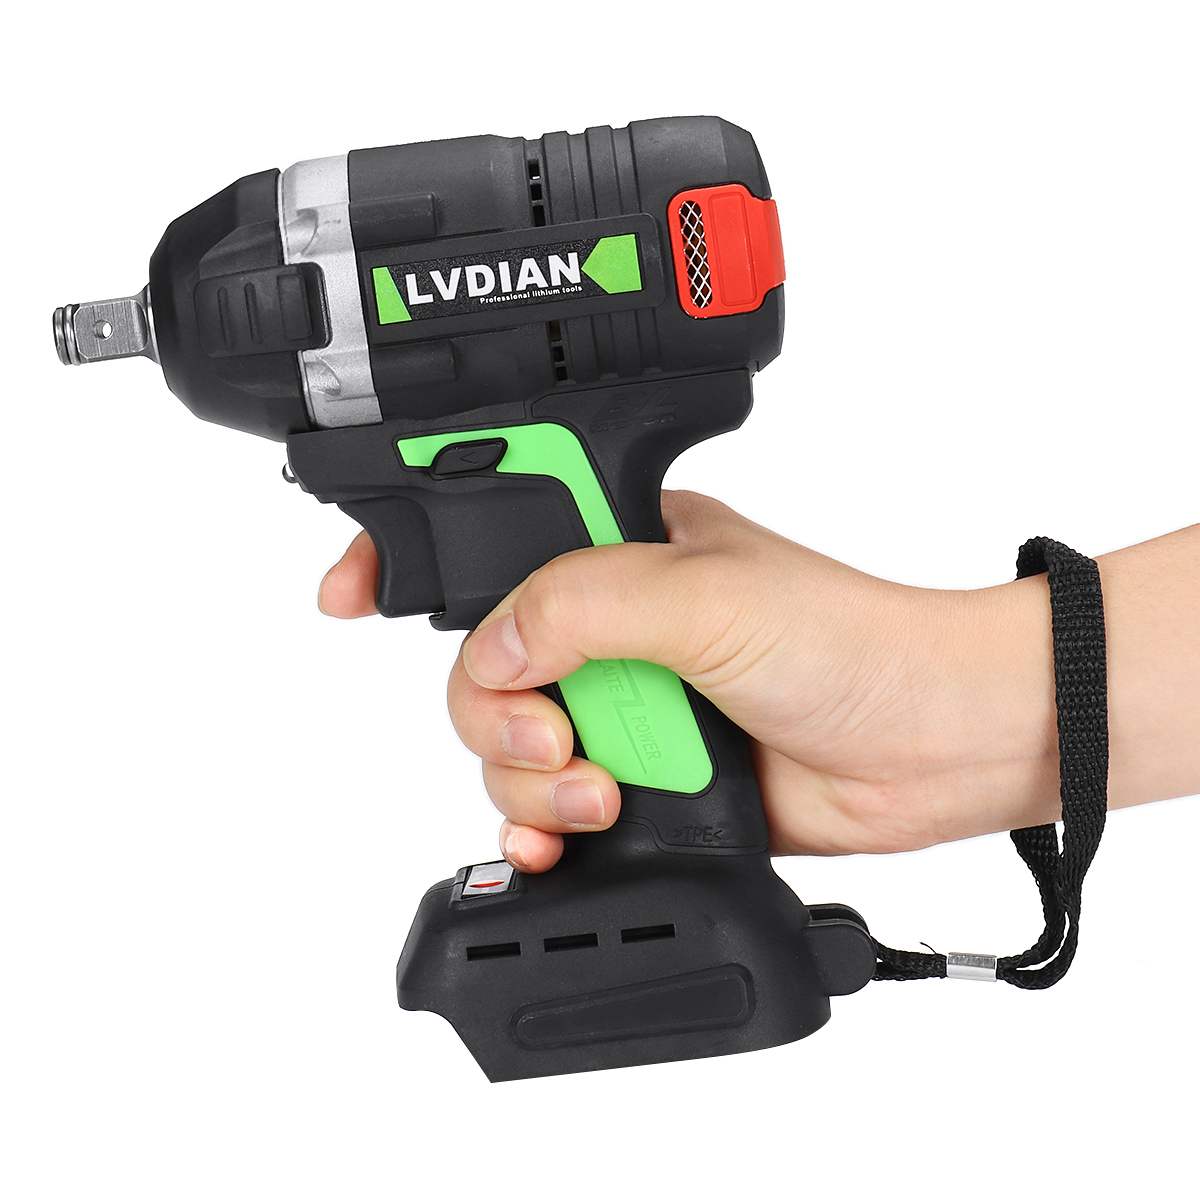 650/680NM High Torque 1/2" Rechargeable Cordless Brushless Impact Wrench Electric Wrench Body Only Power Tool For Makita Battery